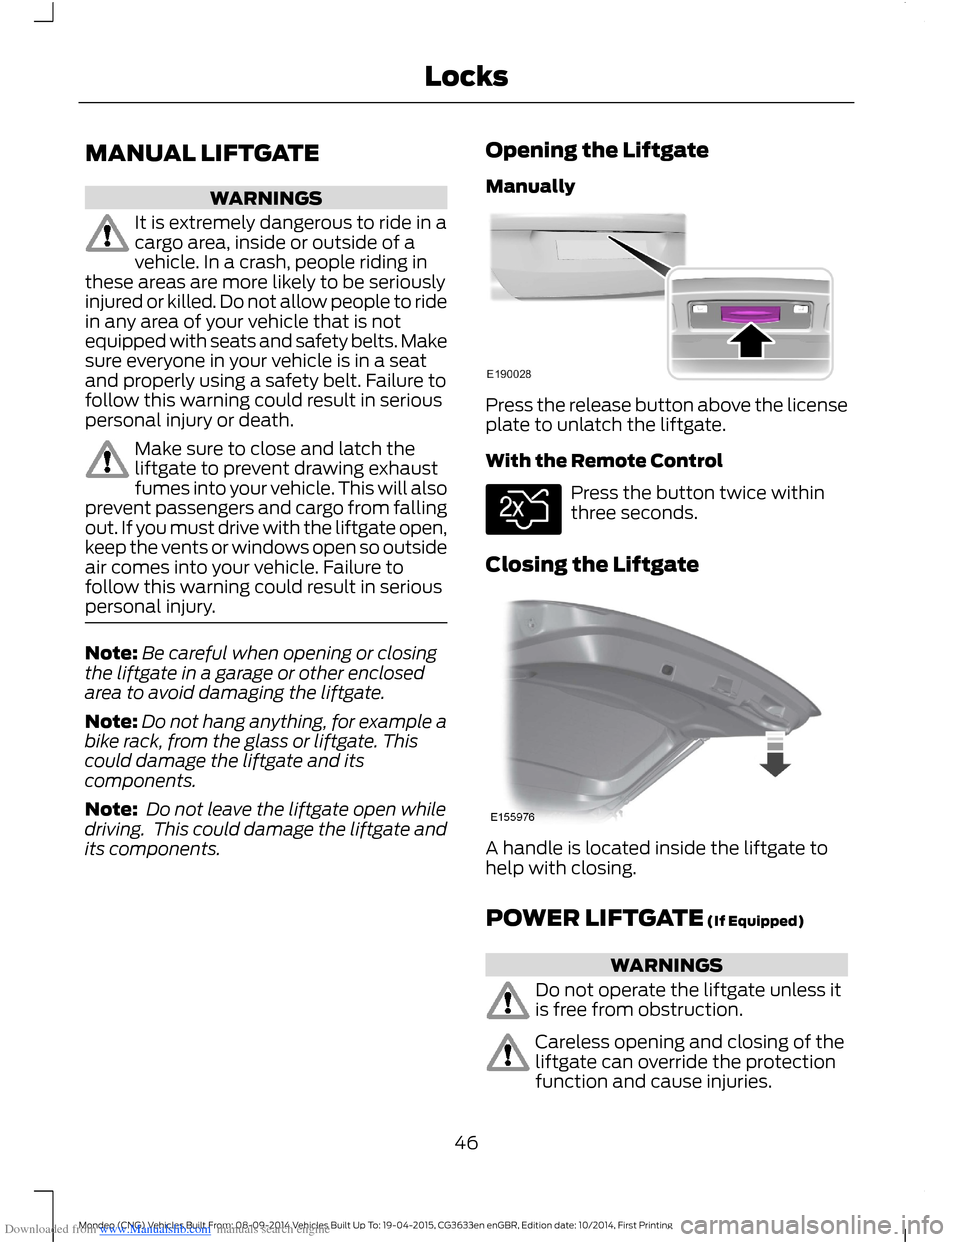 FORD MONDEO 2014 4.G Owners Manual Downloaded from www.Manualslib.com manuals search engine MANUAL LIFTGATE
WARNINGS
It is extremely dangerous to ride in acargo area, inside or outside of avehicle. In a crash, people riding inthese are